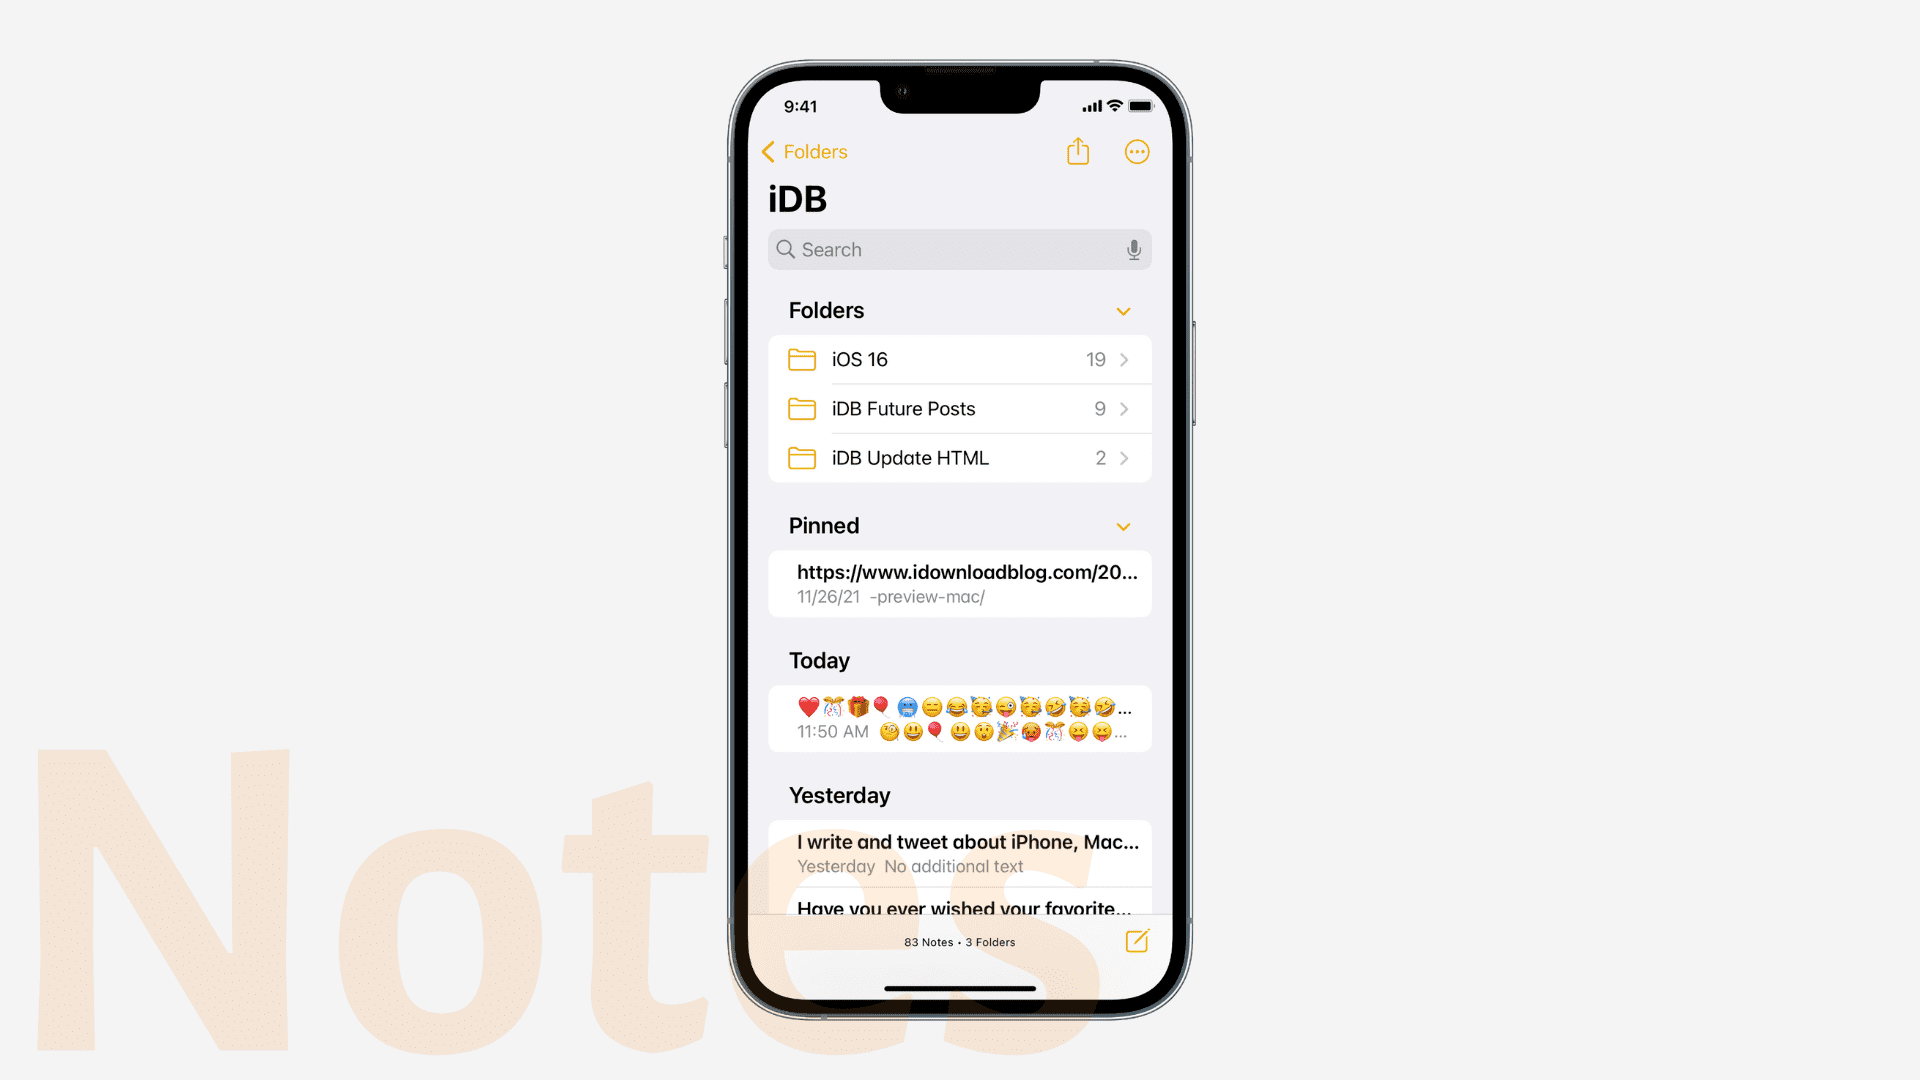 New features in Notes in iOS 16